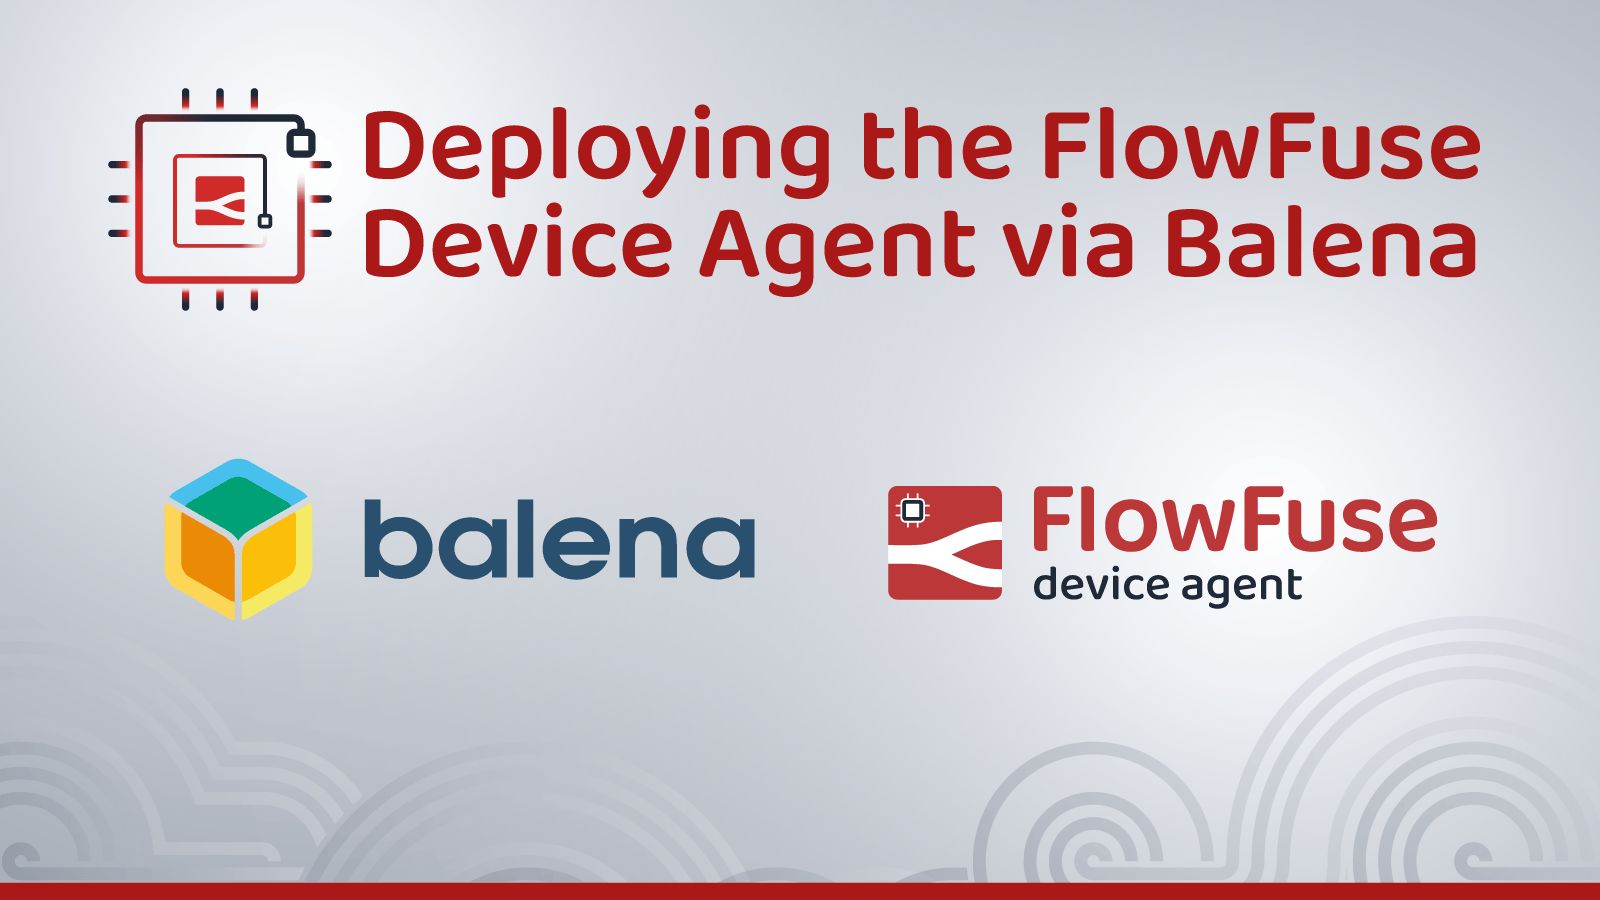 Image representing Deploying the FlowFuse Device Agent via Balena